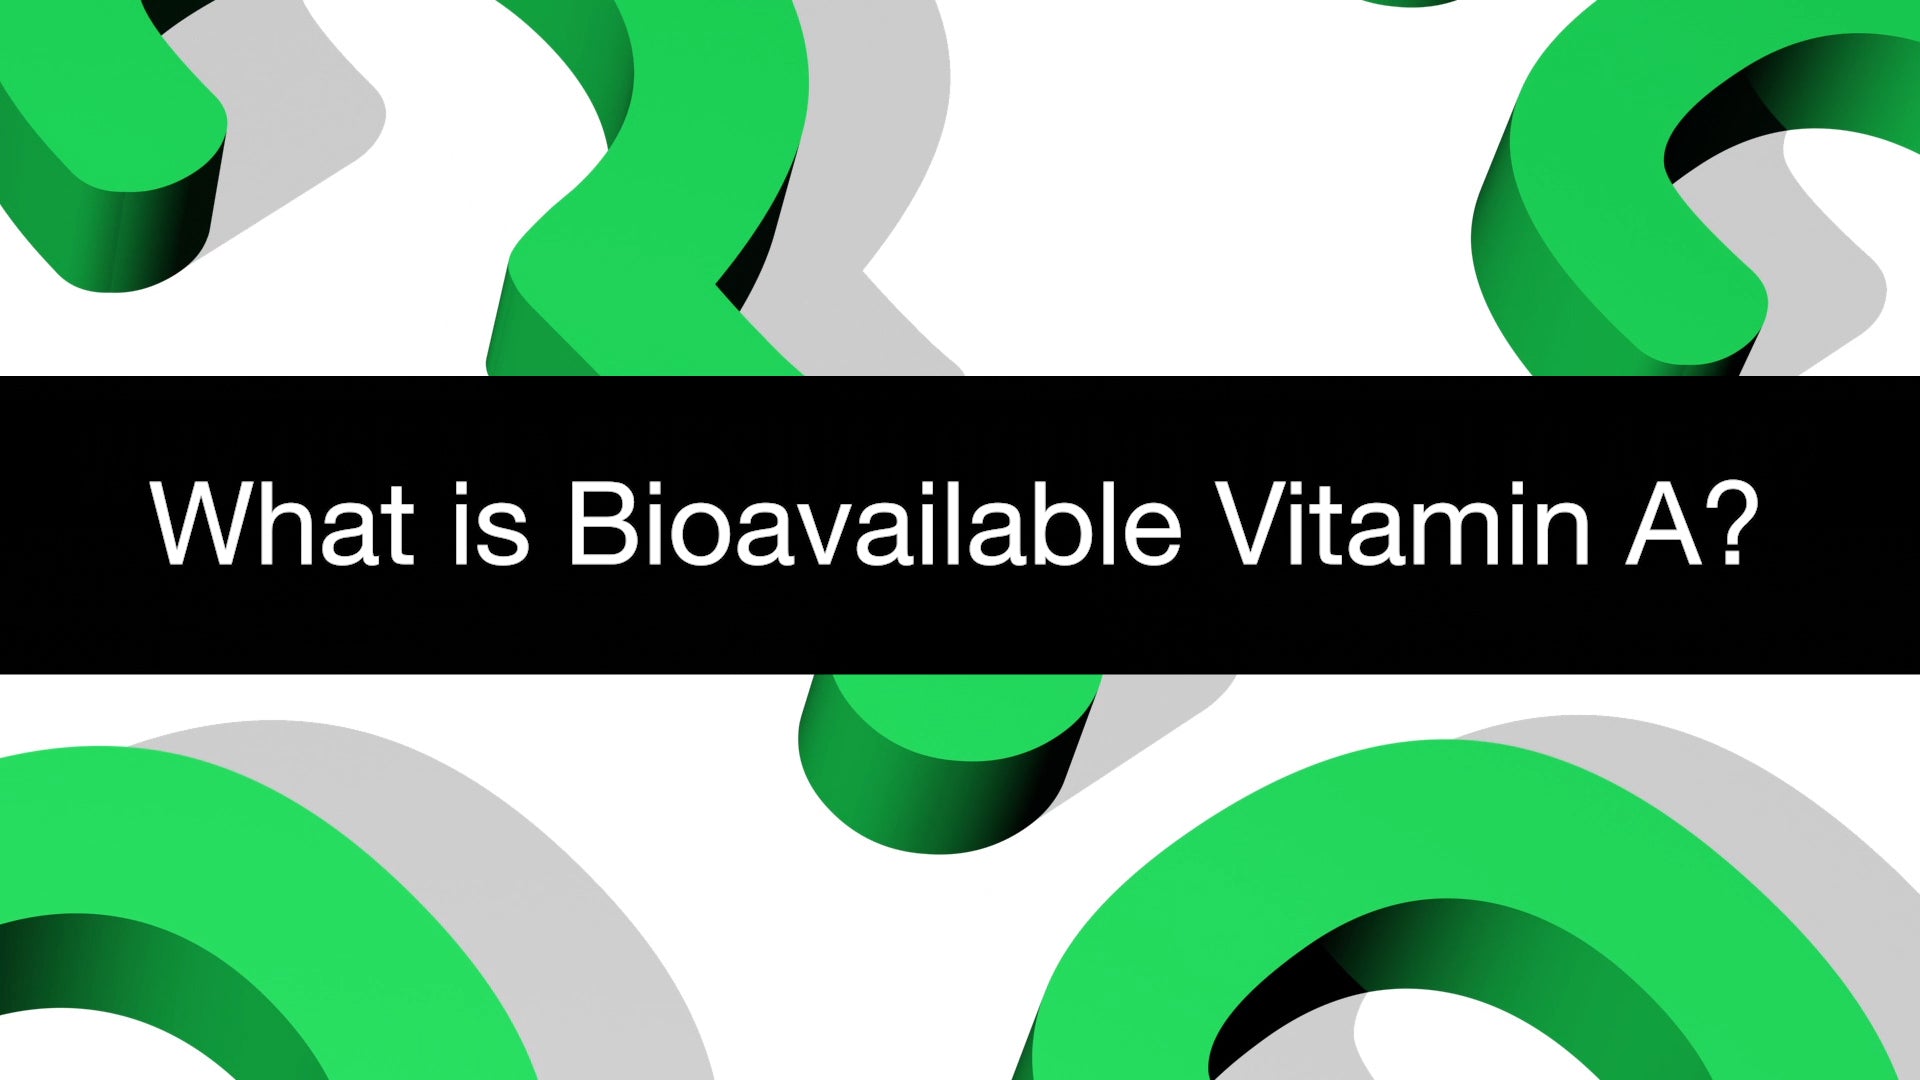 What is Bioavailable Vitamin A?